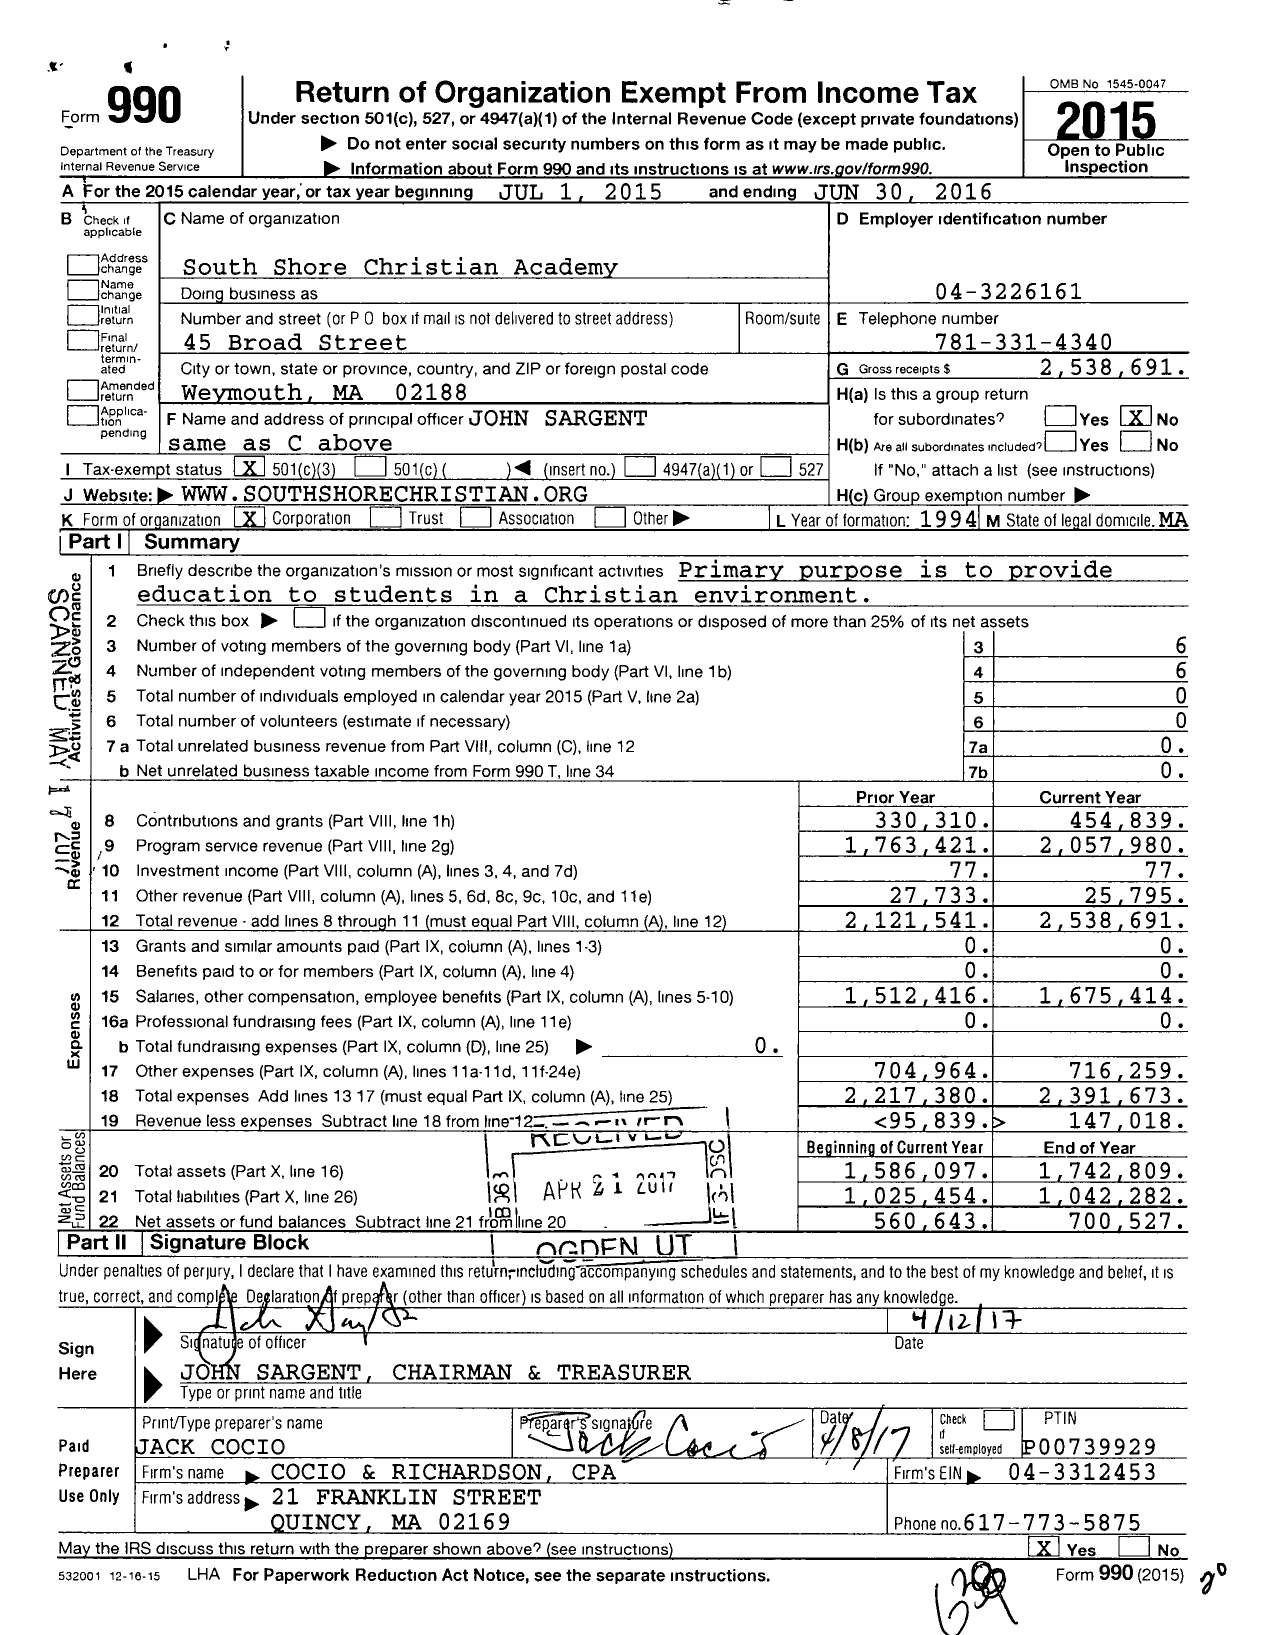 Image of first page of 2015 Form 990 for South Shore Christian Academy (SSCA)